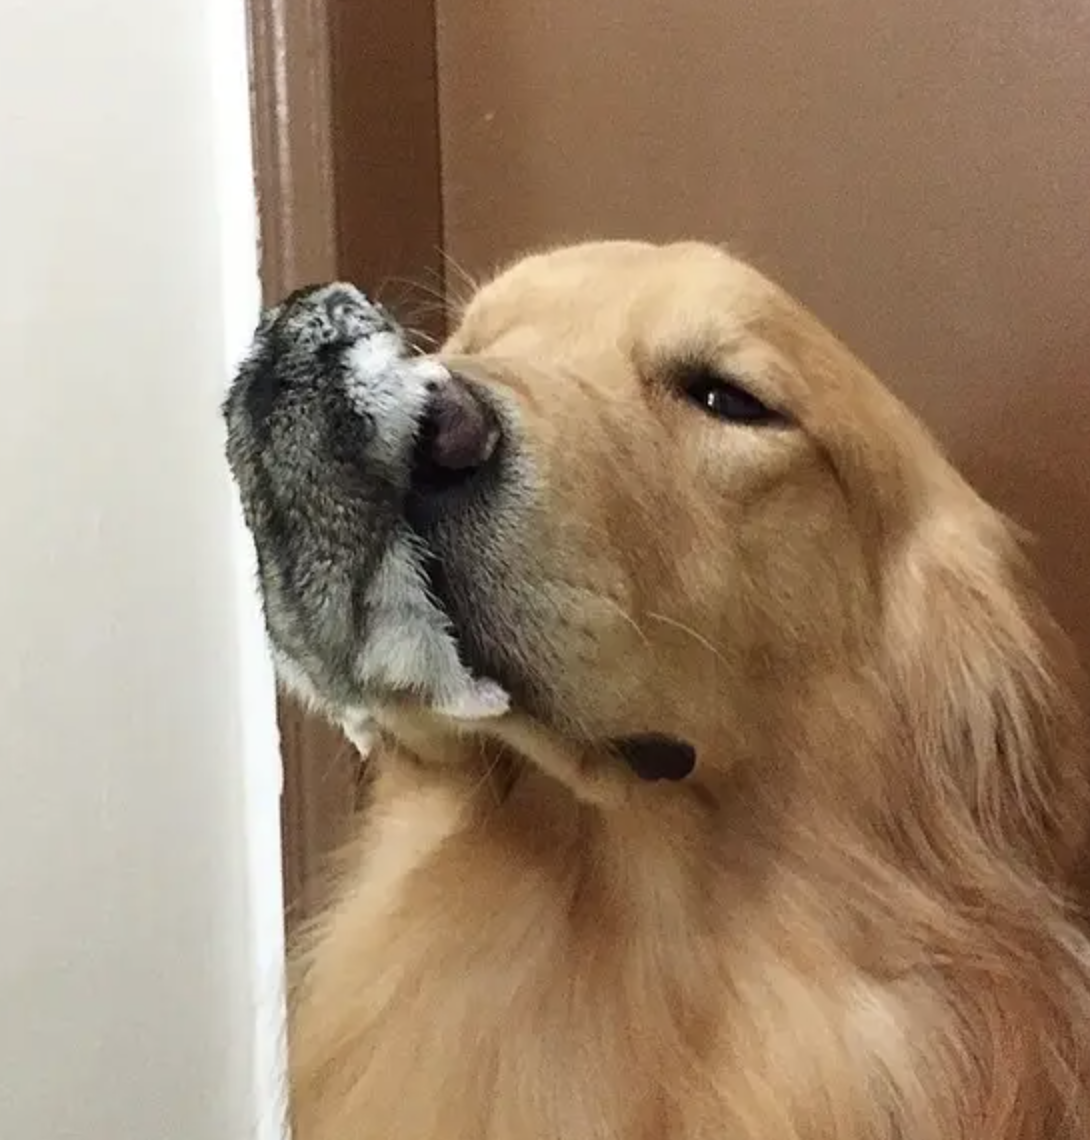 Golden retriever with its nose pressed against a corner, eyes closed, appearing content or sleepy